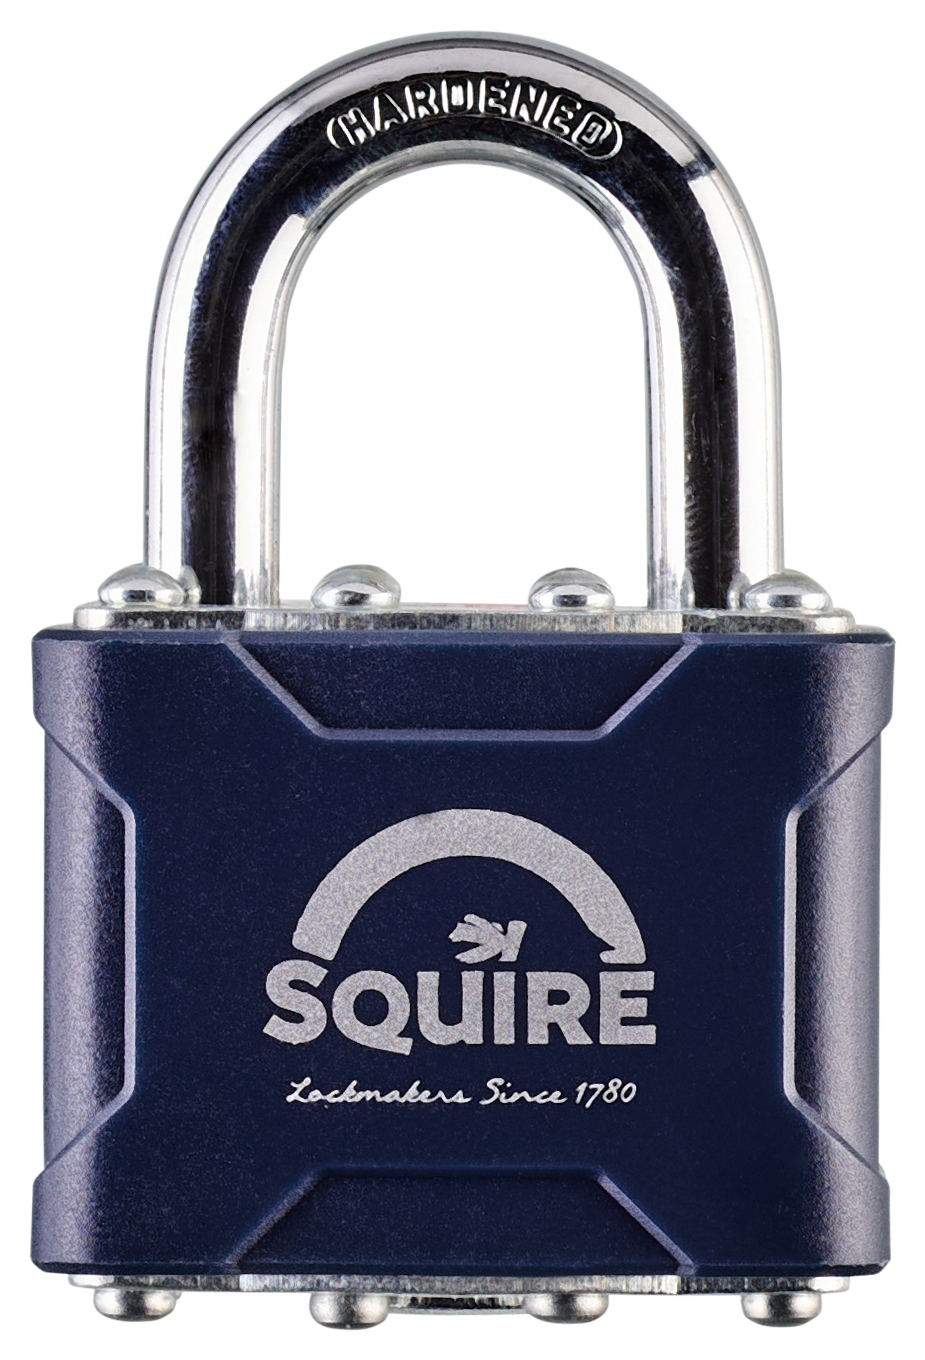 Image of Squire Hardened Steel Shackle Laminated Padlock with Fixings - 38mm